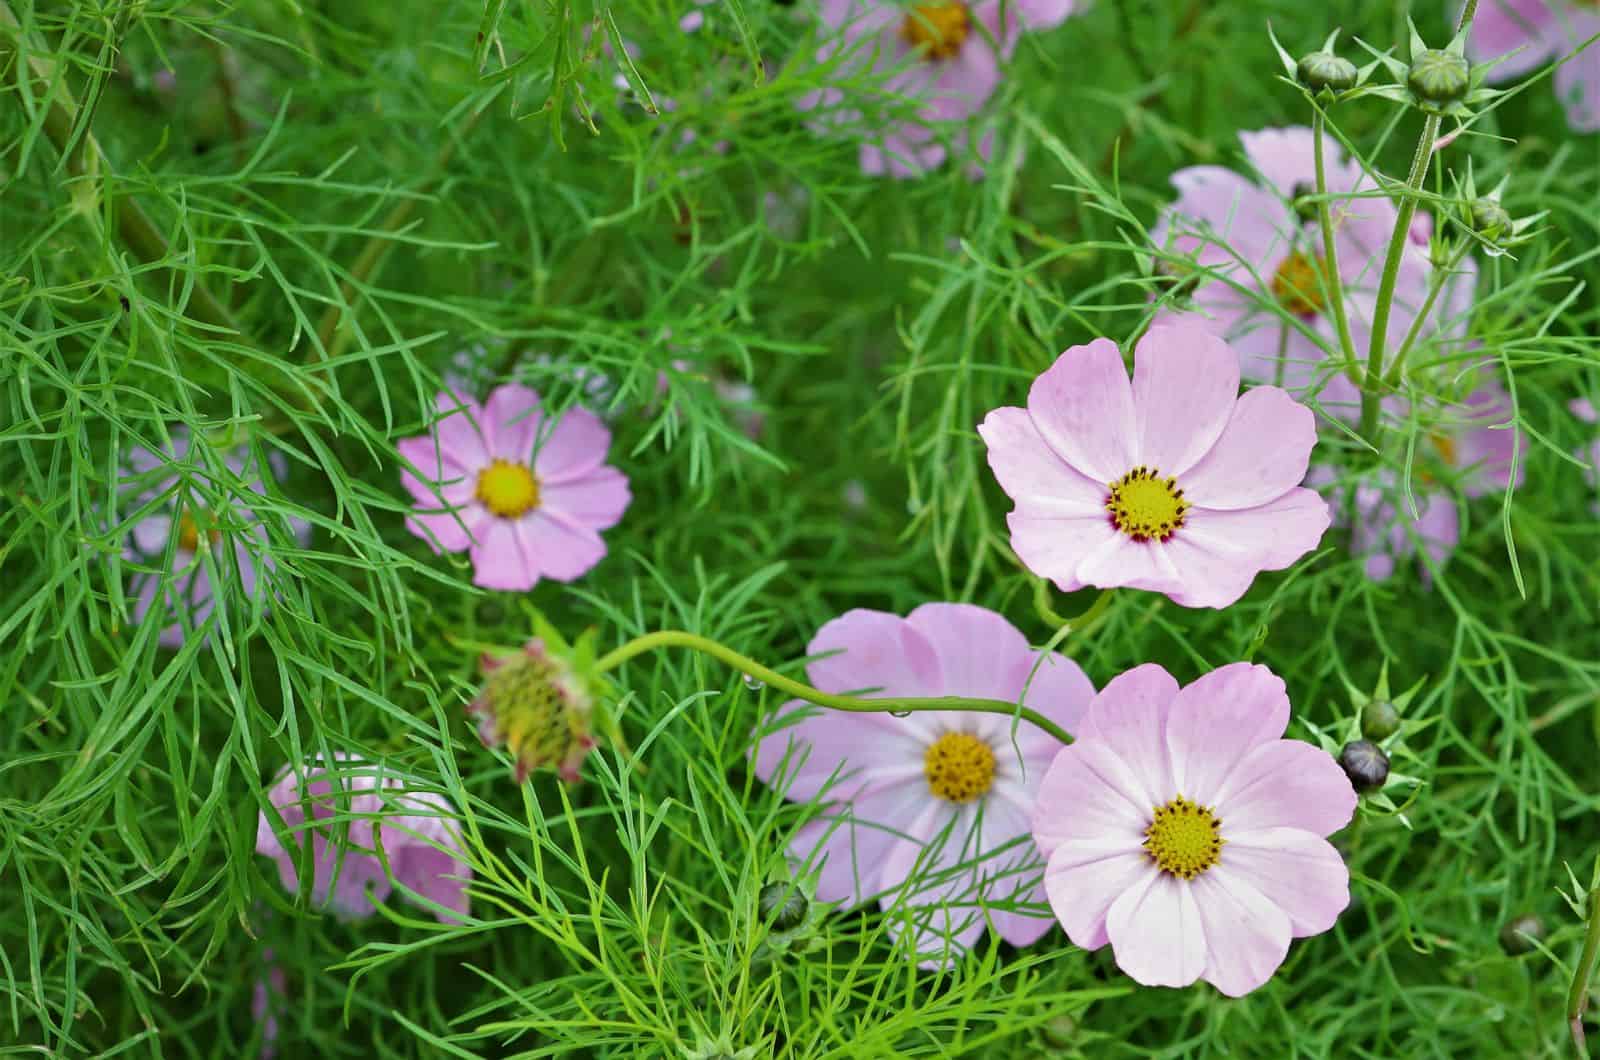 Cosmos Flowers in grass